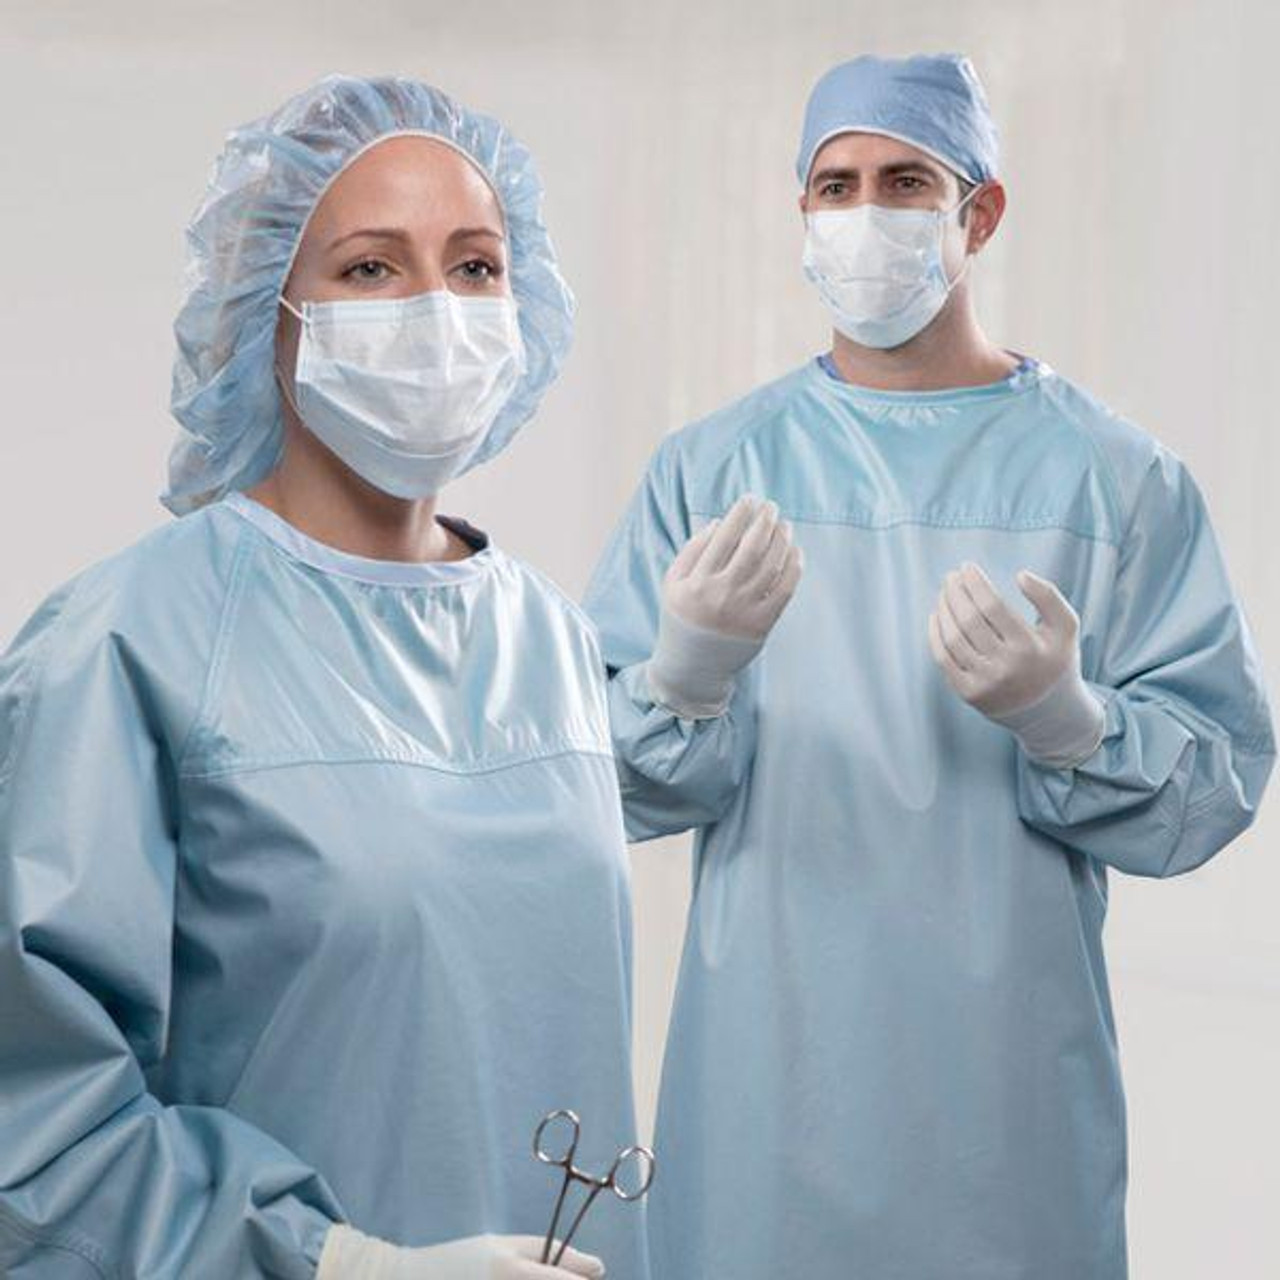 Sterile Surgical Gowns Reinforced ANSI/AAMI PB70, Level 3 Protection M,L,XL  - BM Global Supply Corporation